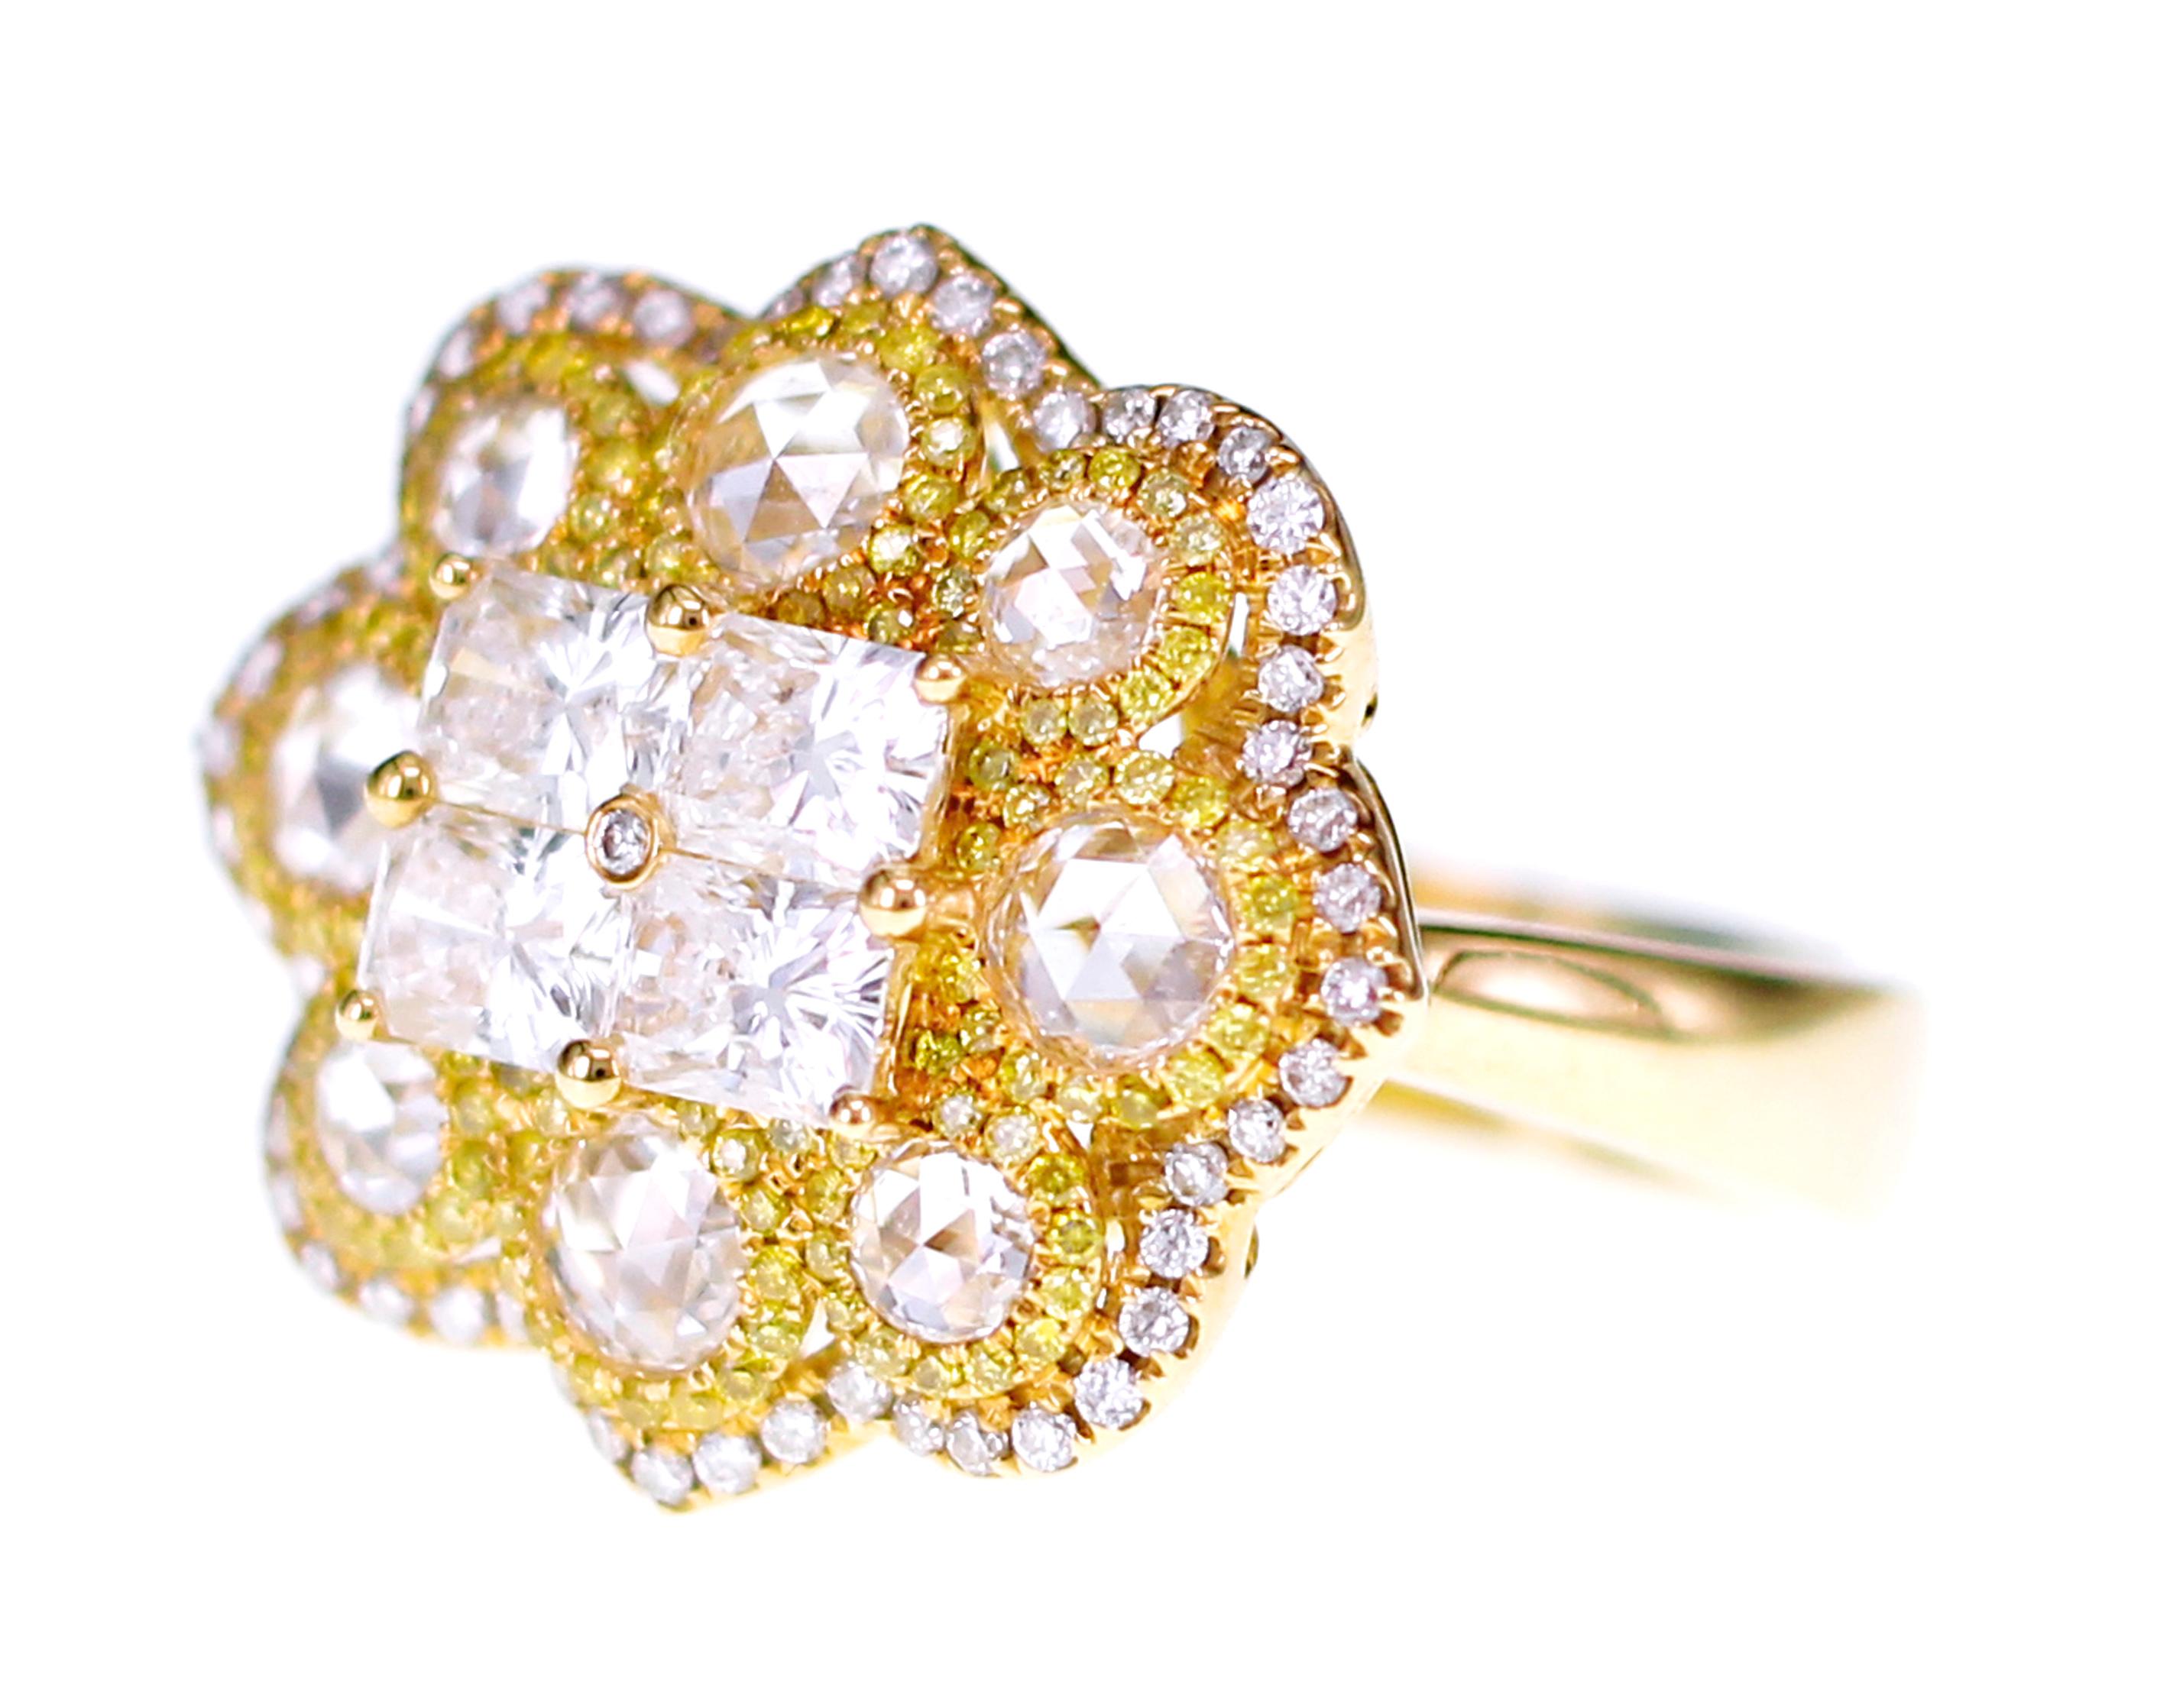 In total 2.24 carats of diamonds are set with white rose cut diamond. Vivid yellow diamonds are sprinkled on the border of the rose cuts to highlight a great combination of brilliance and fancy cut.